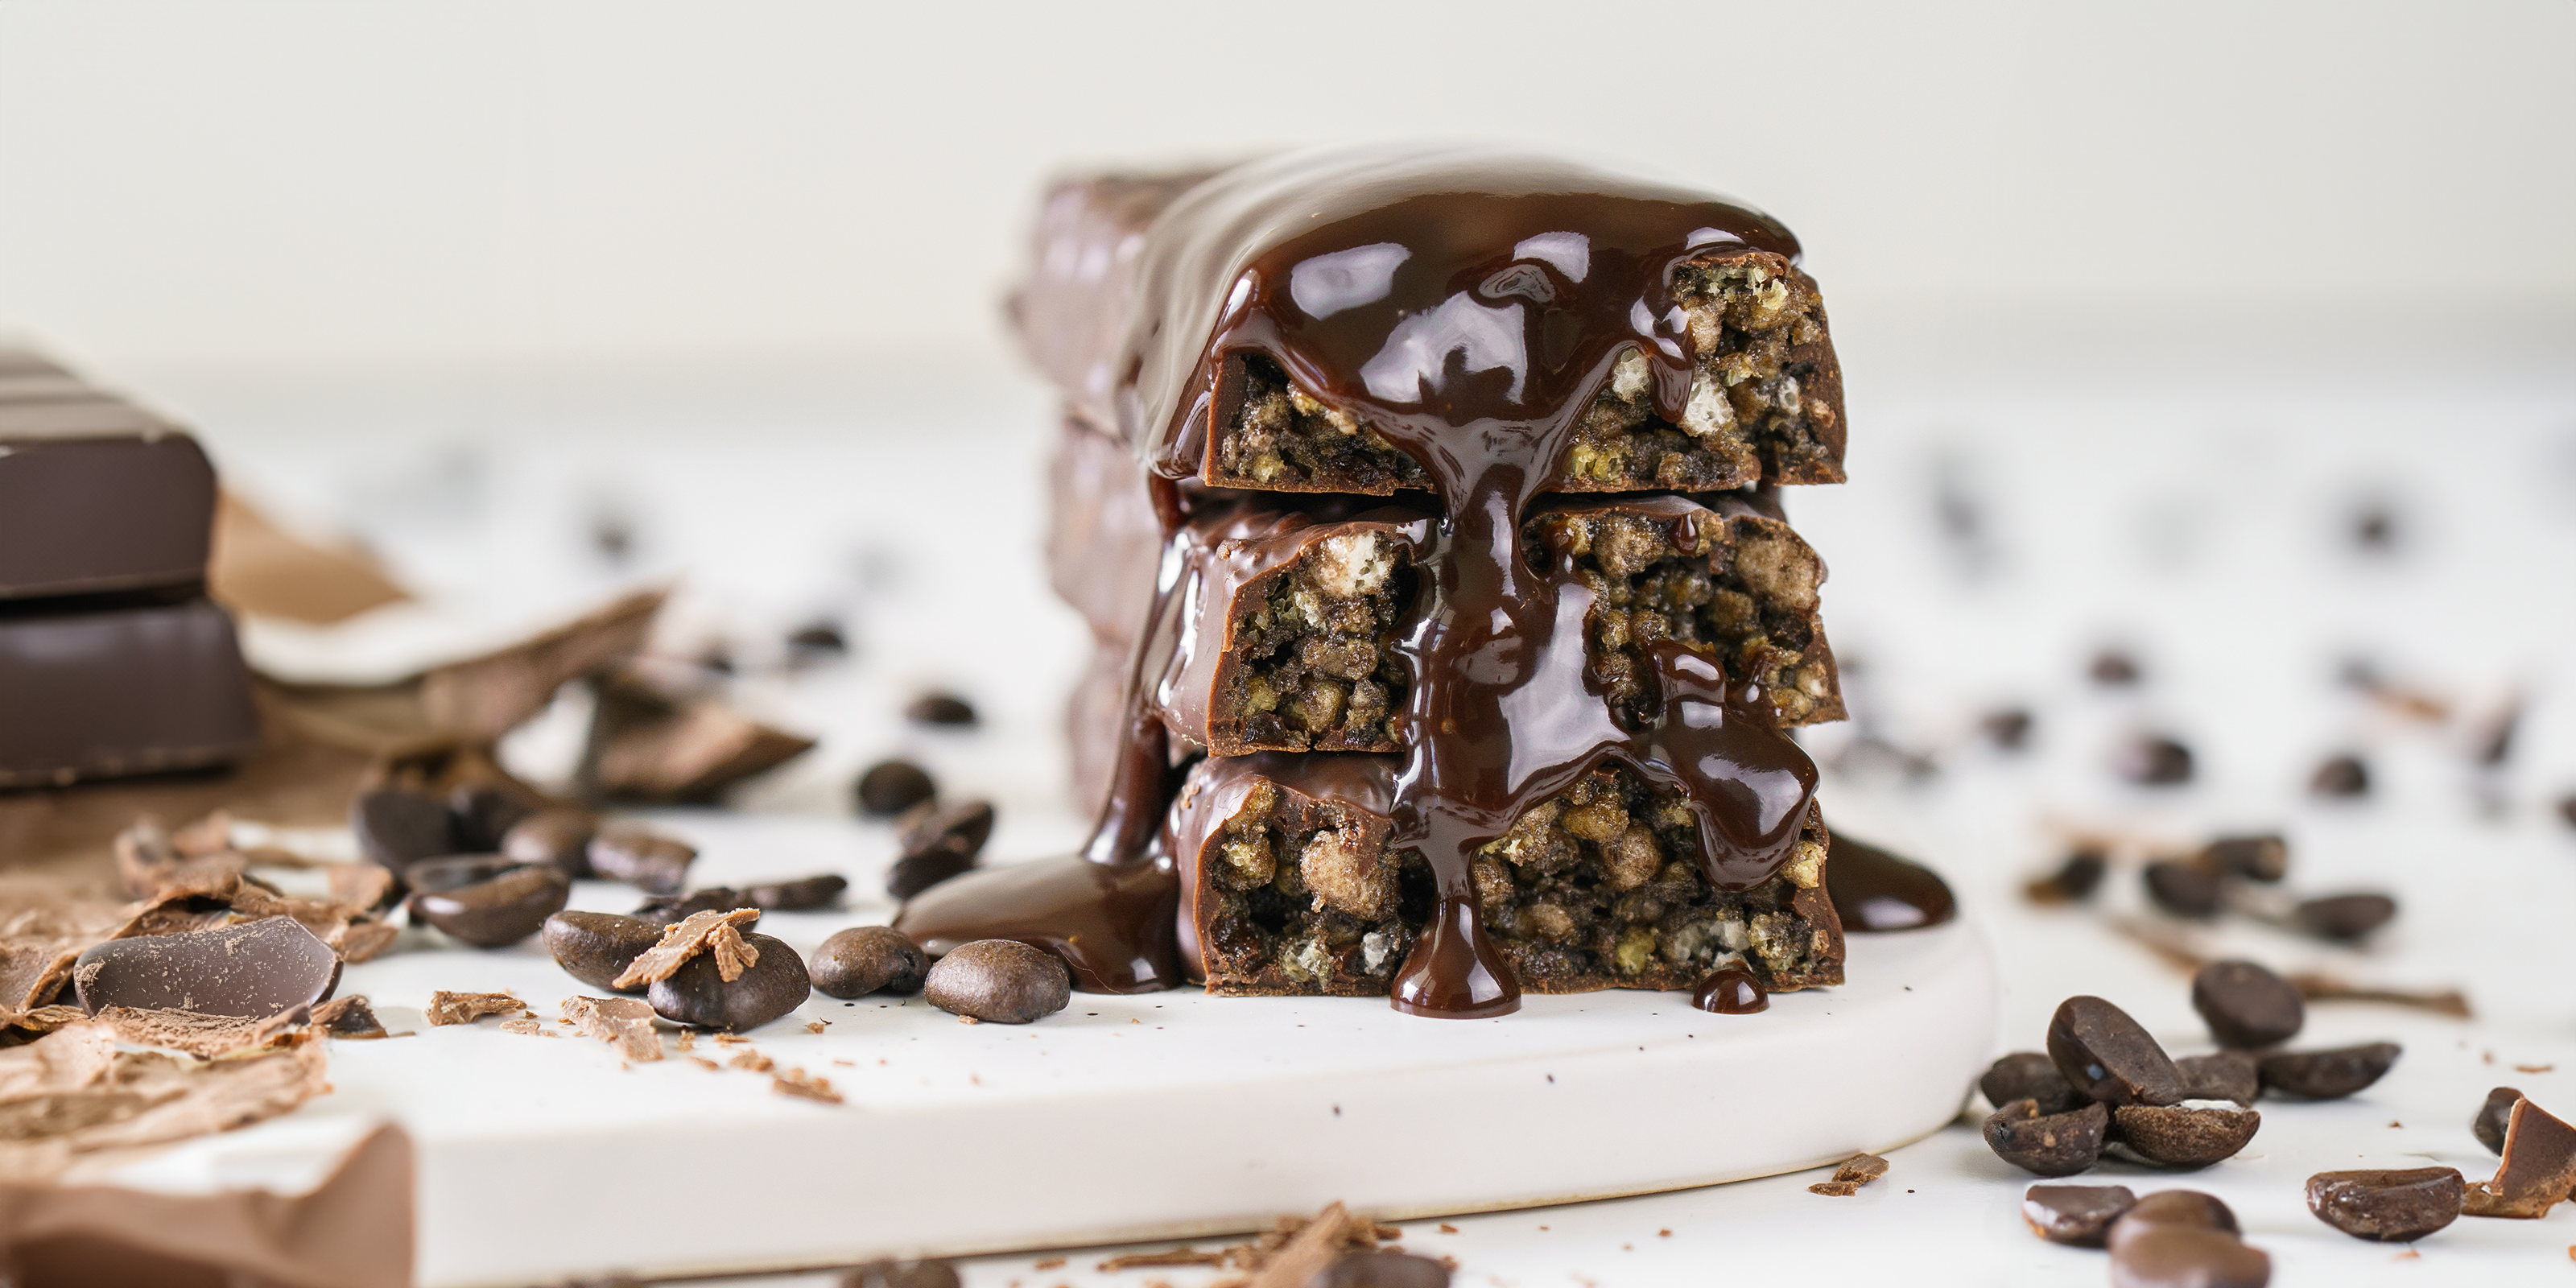 Dark Chocolate Drizzle on Chocolate Protein Bar surrounded by Chocolate Chips